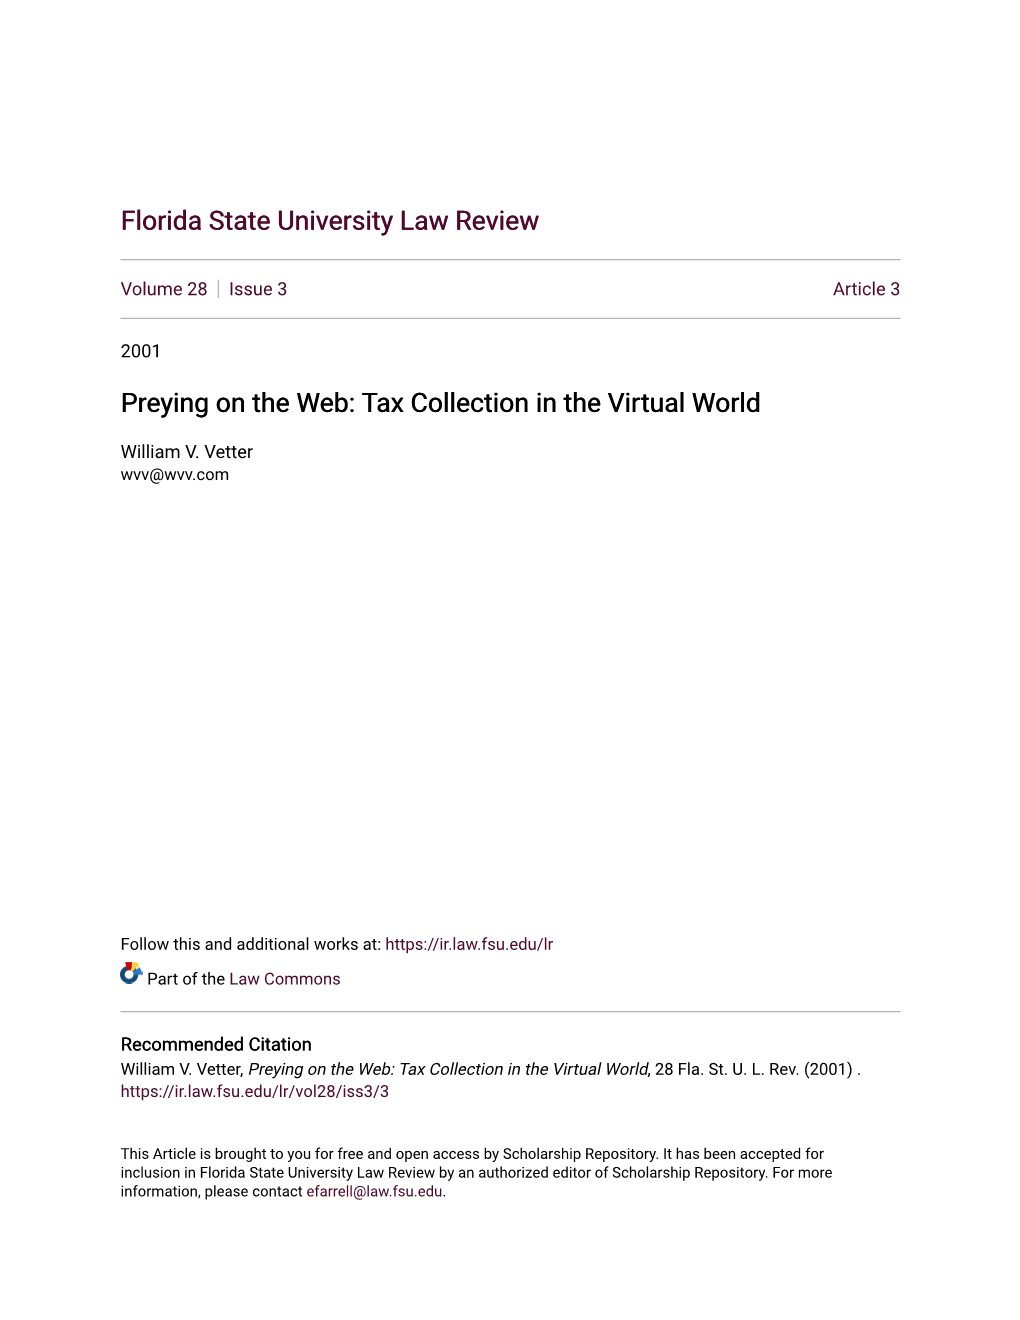 Tax Collection in the Virtual World